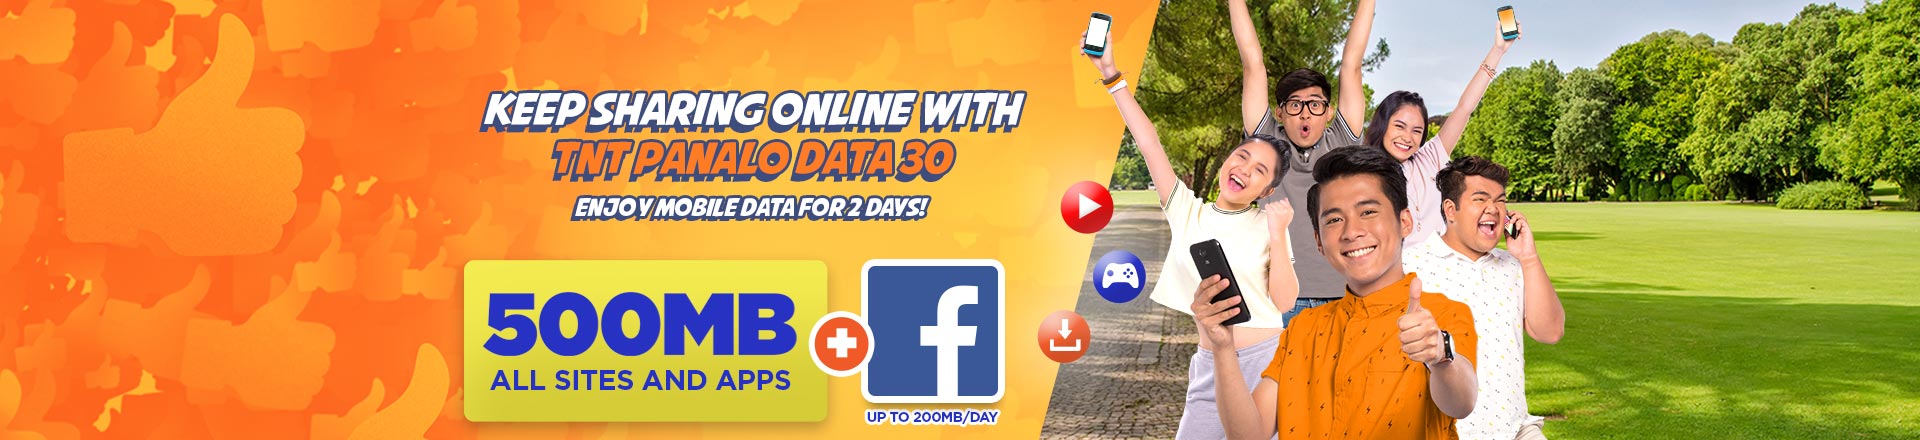 TNT PANALO DATA 30: 500MB of data for all sites and apps - 2 days